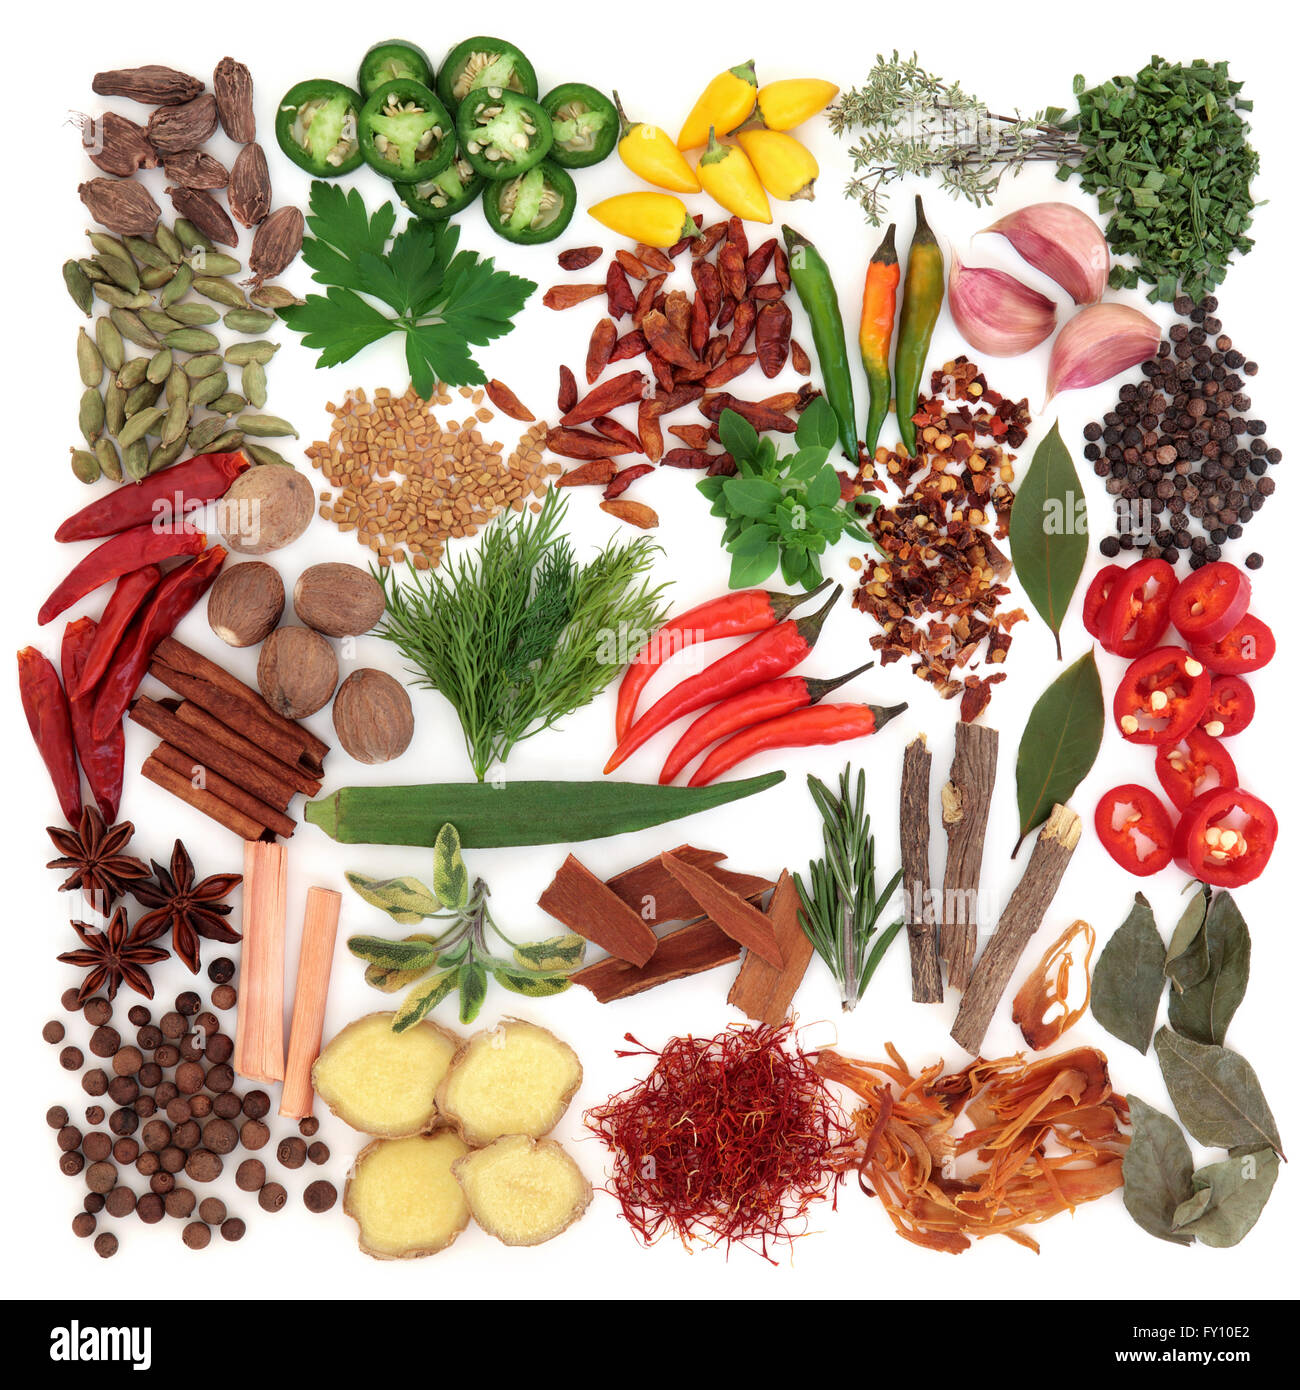 Large herb and spice selection over white background. Stock Photo